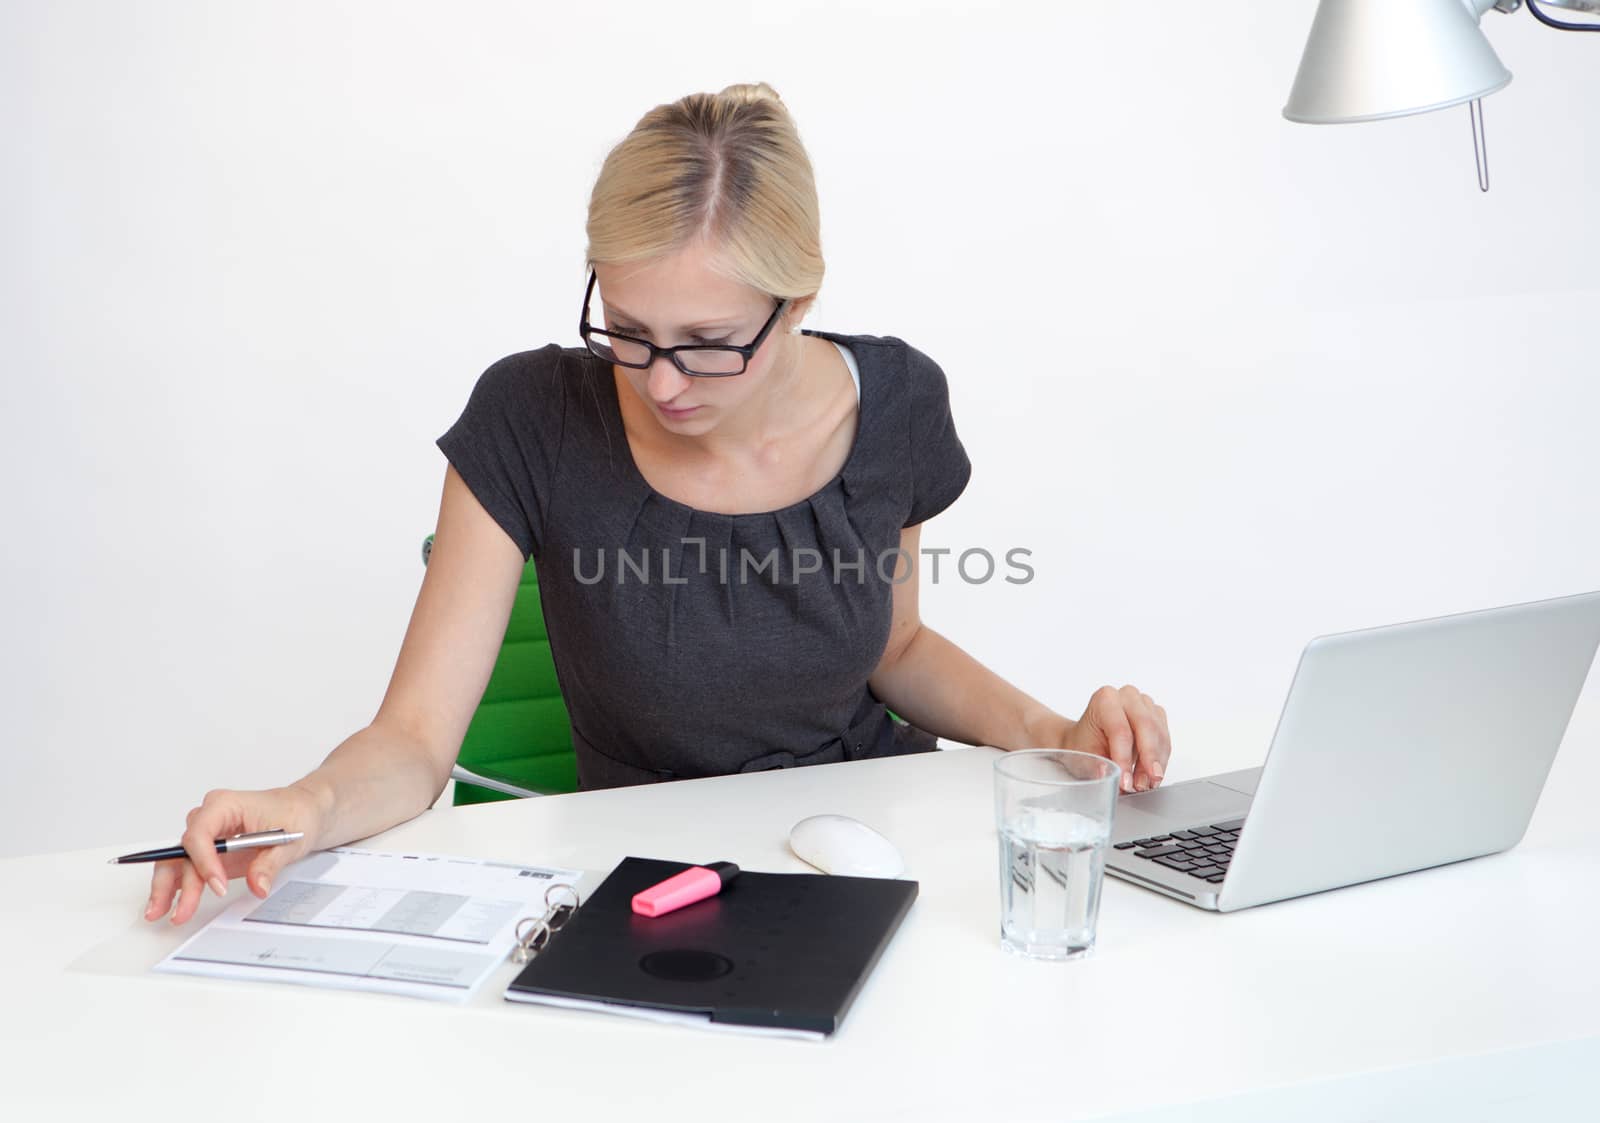 Young Business woman is smiling while working at work desk